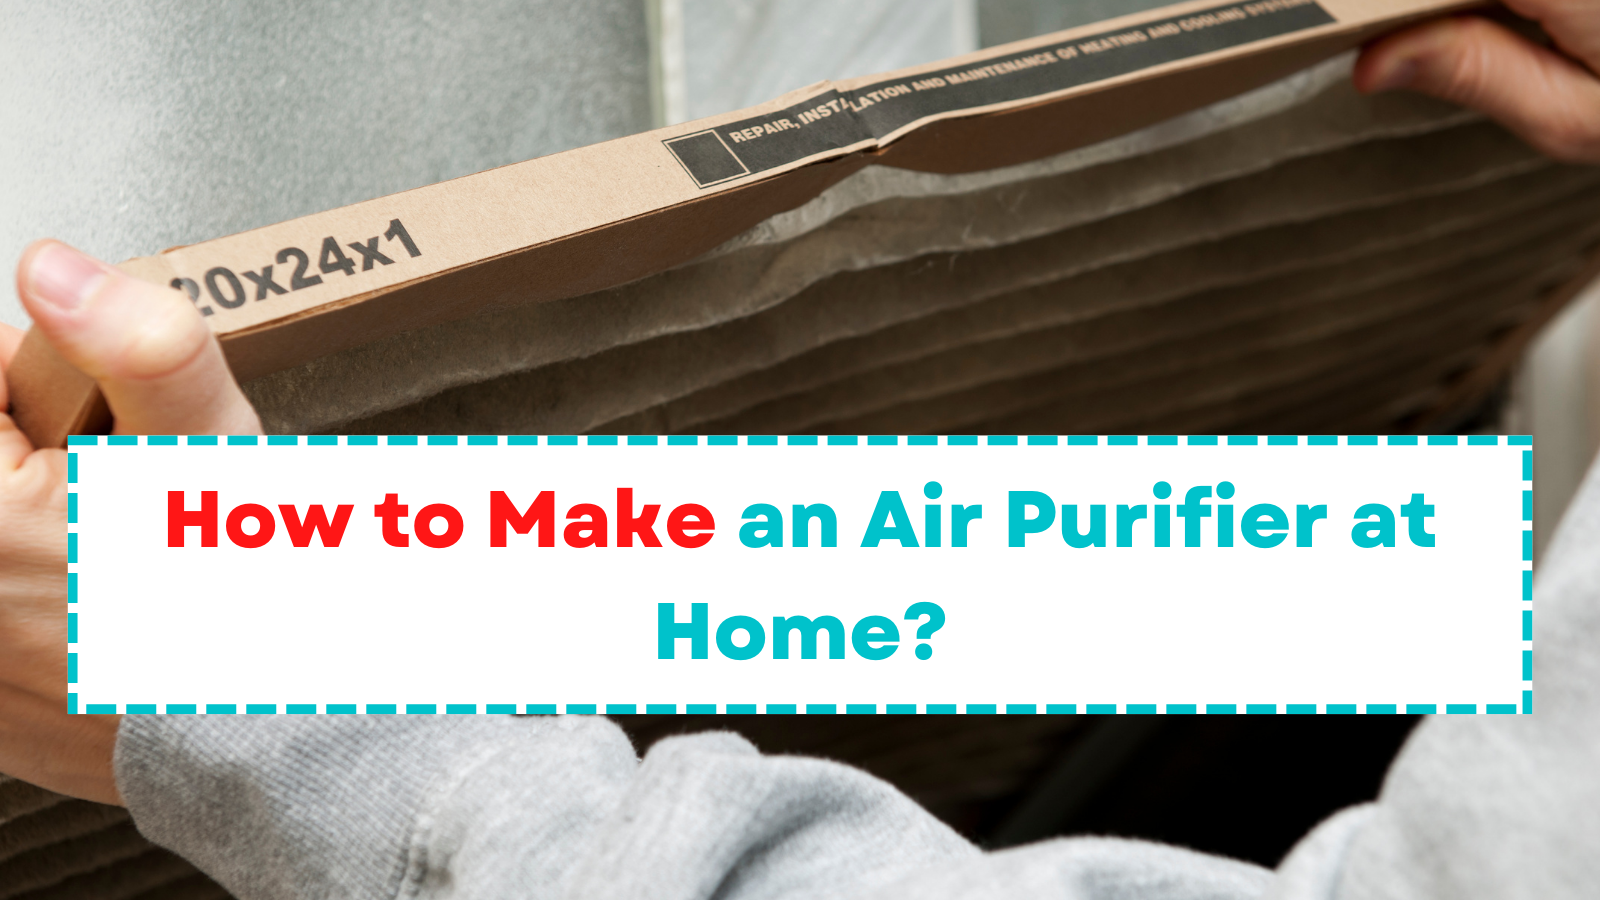 How to Make an Air Purifier at Home?